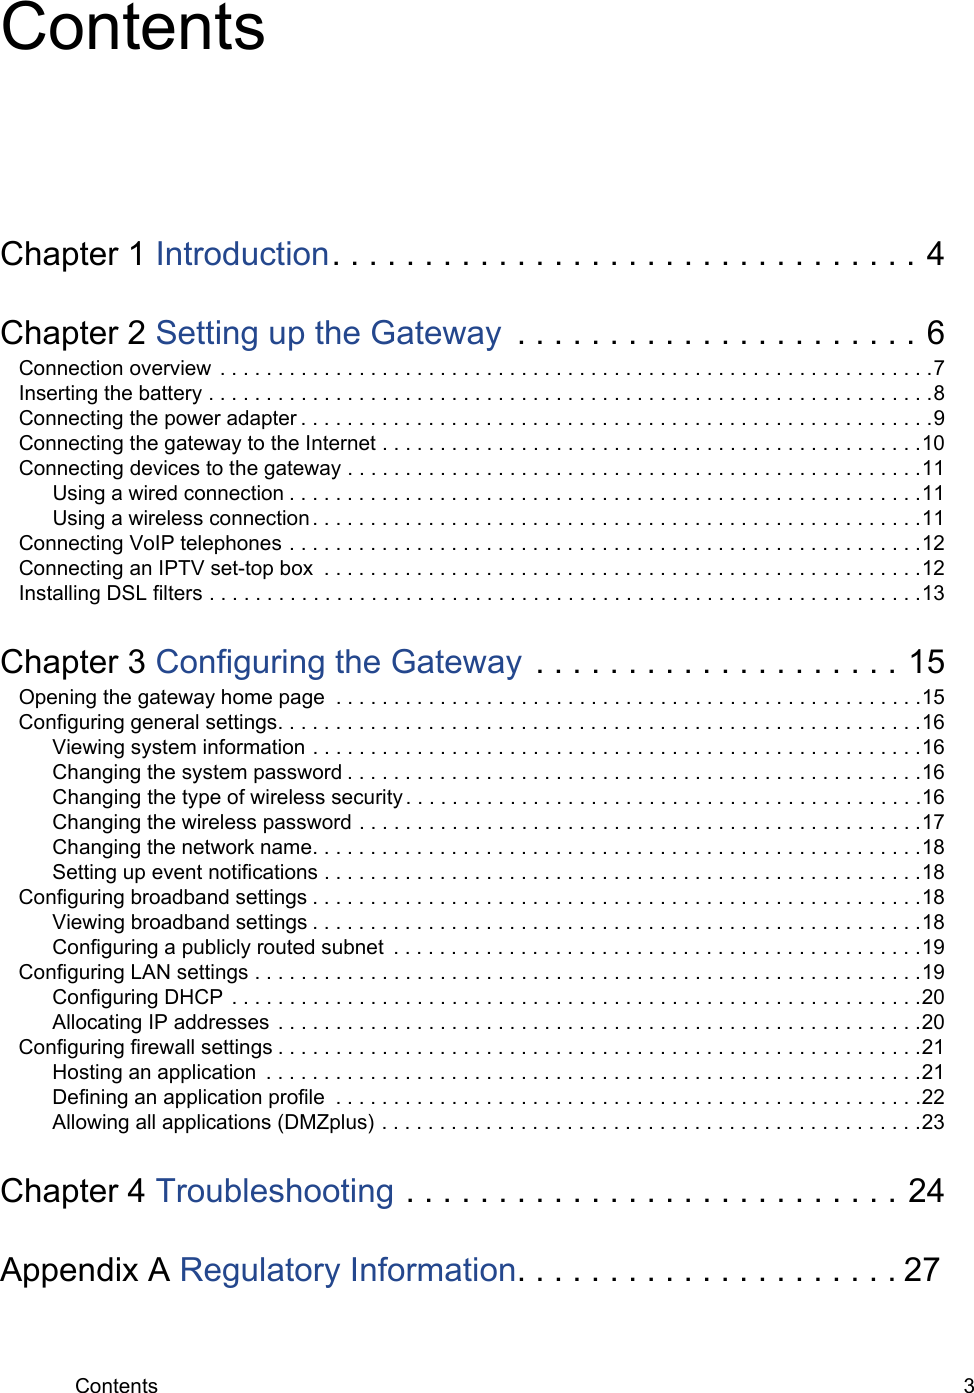 Contents 3ContentsChapter 1 Introduction. . . . . . . . . . . . . . . . . . . . . . . . . . . . . . . . 4Chapter 2 Setting up the Gateway  . . . . . . . . . . . . . . . . . . . . . . 6Connection overview  . . . . . . . . . . . . . . . . . . . . . . . . . . . . . . . . . . . . . . . . . . . . . . . . . . . . . . . . . . . . . .7Inserting the battery . . . . . . . . . . . . . . . . . . . . . . . . . . . . . . . . . . . . . . . . . . . . . . . . . . . . . . . . . . . . . . .8Connecting the power adapter . . . . . . . . . . . . . . . . . . . . . . . . . . . . . . . . . . . . . . . . . . . . . . . . . . . . . . .9Connecting the gateway to the Internet . . . . . . . . . . . . . . . . . . . . . . . . . . . . . . . . . . . . . . . . . . . . . . .10Connecting devices to the gateway . . . . . . . . . . . . . . . . . . . . . . . . . . . . . . . . . . . . . . . . . . . . . . . . . .11Using a wired connection . . . . . . . . . . . . . . . . . . . . . . . . . . . . . . . . . . . . . . . . . . . . . . . . . . . . . . .11Using a wireless connection . . . . . . . . . . . . . . . . . . . . . . . . . . . . . . . . . . . . . . . . . . . . . . . . . . . . .11Connecting VoIP telephones . . . . . . . . . . . . . . . . . . . . . . . . . . . . . . . . . . . . . . . . . . . . . . . . . . . . . . .12Connecting an IPTV set-top box  . . . . . . . . . . . . . . . . . . . . . . . . . . . . . . . . . . . . . . . . . . . . . . . . . . . .12Installing DSL filters . . . . . . . . . . . . . . . . . . . . . . . . . . . . . . . . . . . . . . . . . . . . . . . . . . . . . . . . . . . . . .13Chapter 3 Configuring the Gateway . . . . . . . . . . . . . . . . . . . . 15Opening the gateway home page  . . . . . . . . . . . . . . . . . . . . . . . . . . . . . . . . . . . . . . . . . . . . . . . . . . .15Configuring general settings. . . . . . . . . . . . . . . . . . . . . . . . . . . . . . . . . . . . . . . . . . . . . . . . . . . . . . . .16Viewing system information . . . . . . . . . . . . . . . . . . . . . . . . . . . . . . . . . . . . . . . . . . . . . . . . . . . . .16Changing the system password . . . . . . . . . . . . . . . . . . . . . . . . . . . . . . . . . . . . . . . . . . . . . . . . . .16Changing the type of wireless security. . . . . . . . . . . . . . . . . . . . . . . . . . . . . . . . . . . . . . . . . . . . .16Changing the wireless password . . . . . . . . . . . . . . . . . . . . . . . . . . . . . . . . . . . . . . . . . . . . . . . . .17Changing the network name. . . . . . . . . . . . . . . . . . . . . . . . . . . . . . . . . . . . . . . . . . . . . . . . . . . . .18Setting up event notifications . . . . . . . . . . . . . . . . . . . . . . . . . . . . . . . . . . . . . . . . . . . . . . . . . . . .18Configuring broadband settings . . . . . . . . . . . . . . . . . . . . . . . . . . . . . . . . . . . . . . . . . . . . . . . . . . . . .18Viewing broadband settings . . . . . . . . . . . . . . . . . . . . . . . . . . . . . . . . . . . . . . . . . . . . . . . . . . . . .18Configuring a publicly routed subnet  . . . . . . . . . . . . . . . . . . . . . . . . . . . . . . . . . . . . . . . . . . . . . .19Configuring LAN settings . . . . . . . . . . . . . . . . . . . . . . . . . . . . . . . . . . . . . . . . . . . . . . . . . . . . . . . . . .19Configuring DHCP  . . . . . . . . . . . . . . . . . . . . . . . . . . . . . . . . . . . . . . . . . . . . . . . . . . . . . . . . . . . .20Allocating IP addresses  . . . . . . . . . . . . . . . . . . . . . . . . . . . . . . . . . . . . . . . . . . . . . . . . . . . . . . . .20Configuring firewall settings . . . . . . . . . . . . . . . . . . . . . . . . . . . . . . . . . . . . . . . . . . . . . . . . . . . . . . . .21Hosting an application  . . . . . . . . . . . . . . . . . . . . . . . . . . . . . . . . . . . . . . . . . . . . . . . . . . . . . . . . .21Defining an application profile  . . . . . . . . . . . . . . . . . . . . . . . . . . . . . . . . . . . . . . . . . . . . . . . . . . .22Allowing all applications (DMZplus) . . . . . . . . . . . . . . . . . . . . . . . . . . . . . . . . . . . . . . . . . . . . . . .23Chapter 4 Troubleshooting . . . . . . . . . . . . . . . . . . . . . . . . . . . 24Appendix A Regulatory Information. . . . . . . . . . . . . . . . . . . . . 27